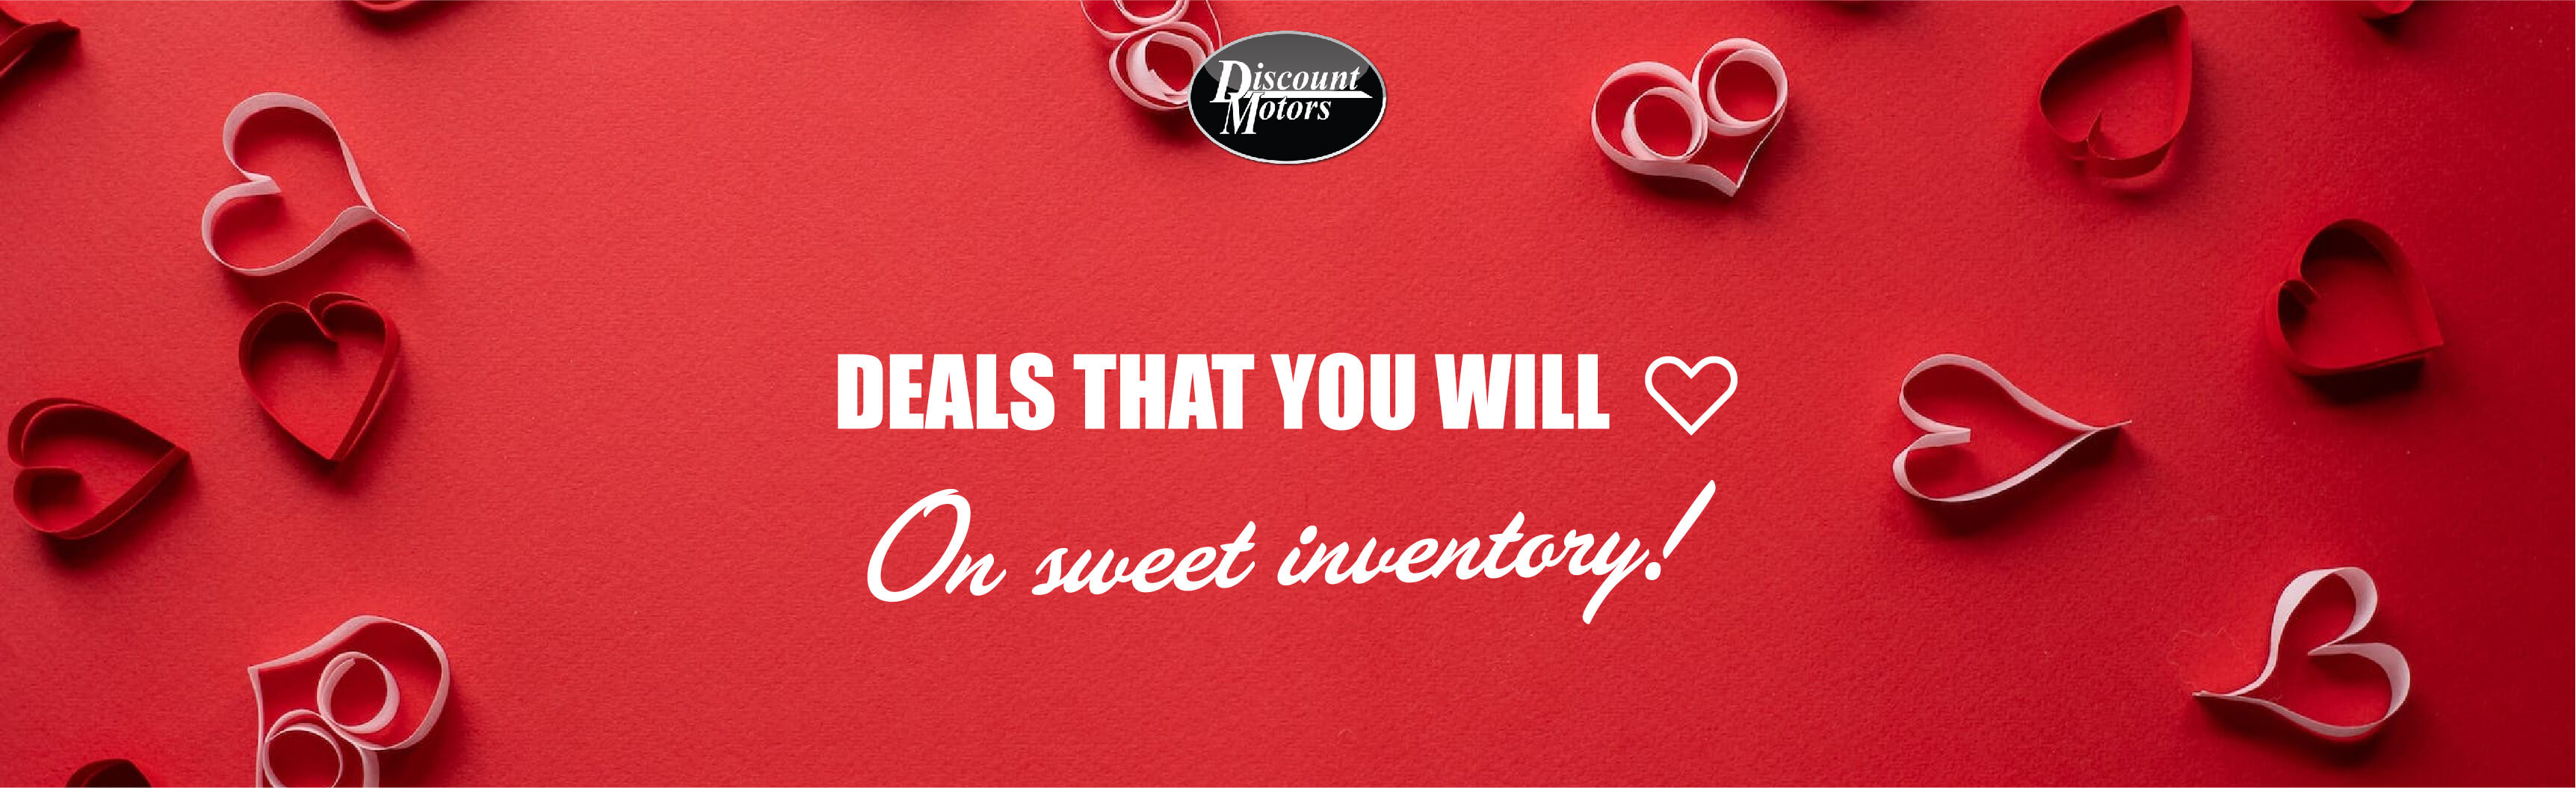 Paper-cut hearts littered on a table with advert slogan. Fall in love with our great deals.